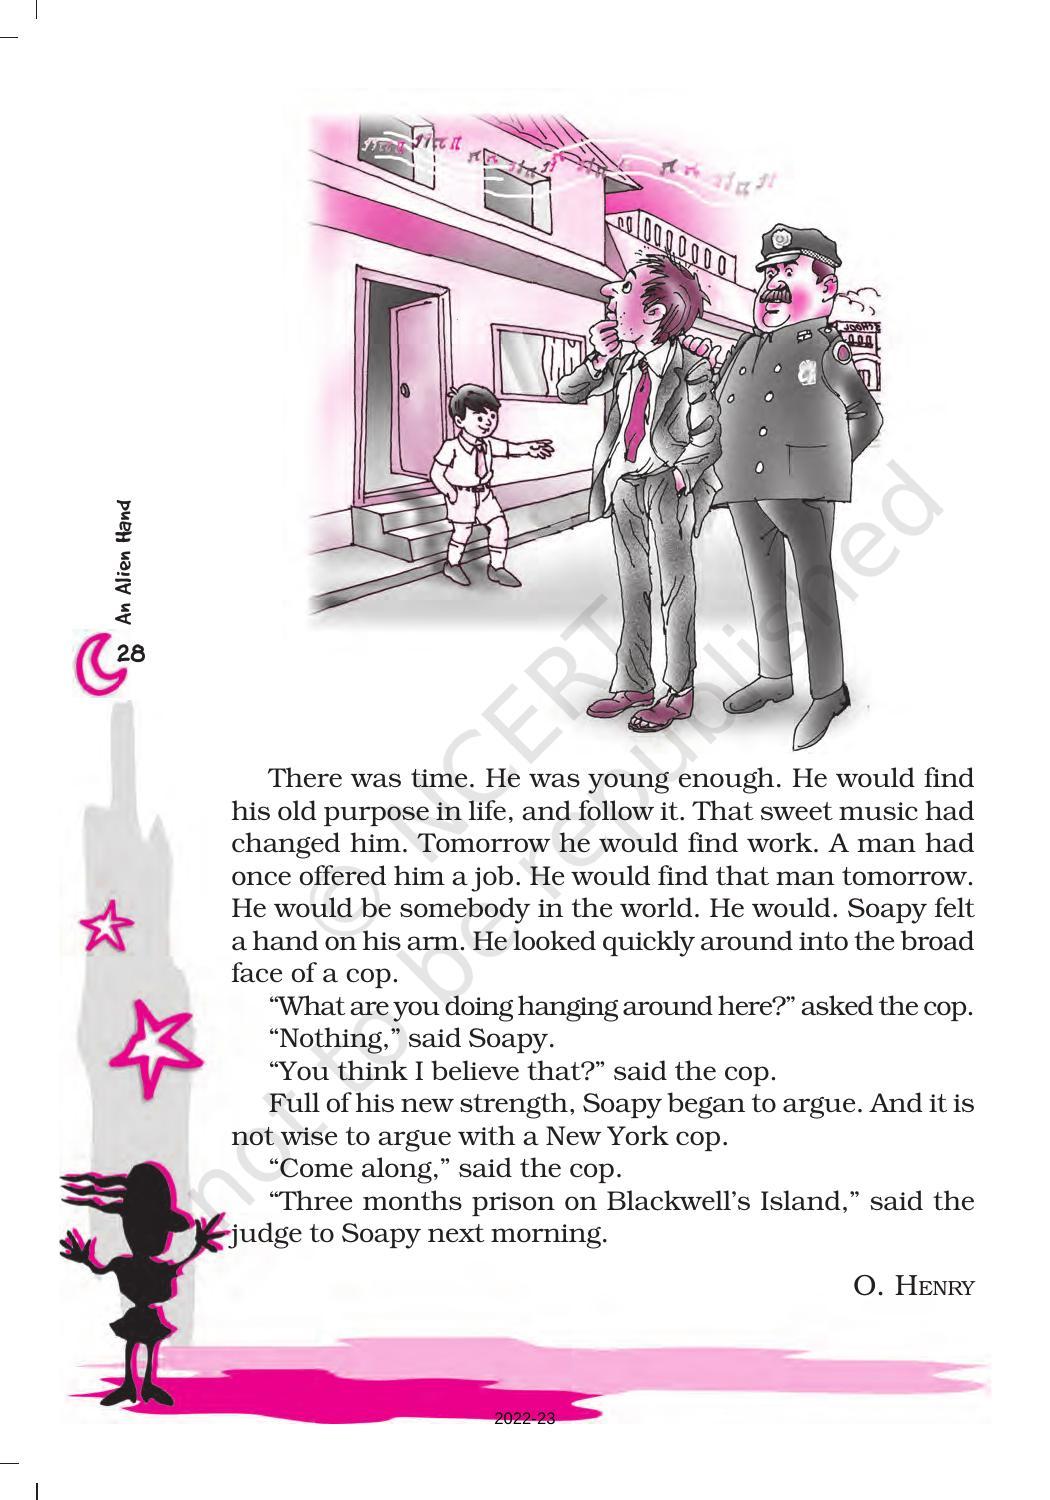 NCERT Book for Class 7 English (An Alien Hand): Chapter 4-The Cop and the Anthem - Page 9